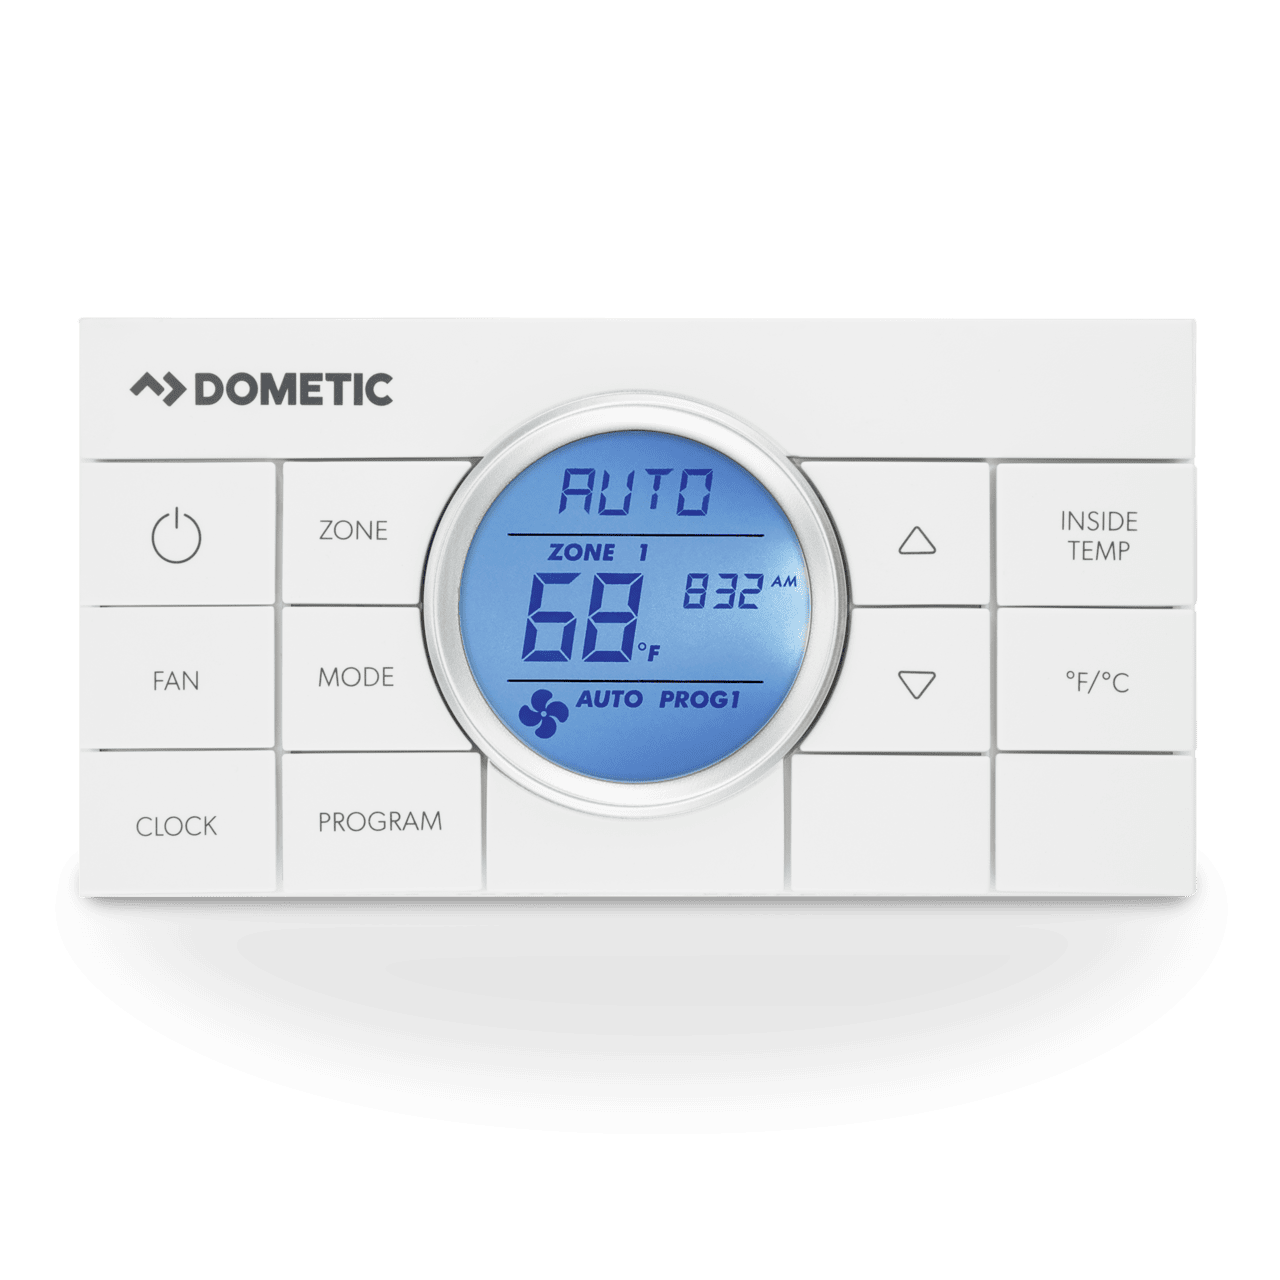 Dometic Comfort Control Center 2 thermostat